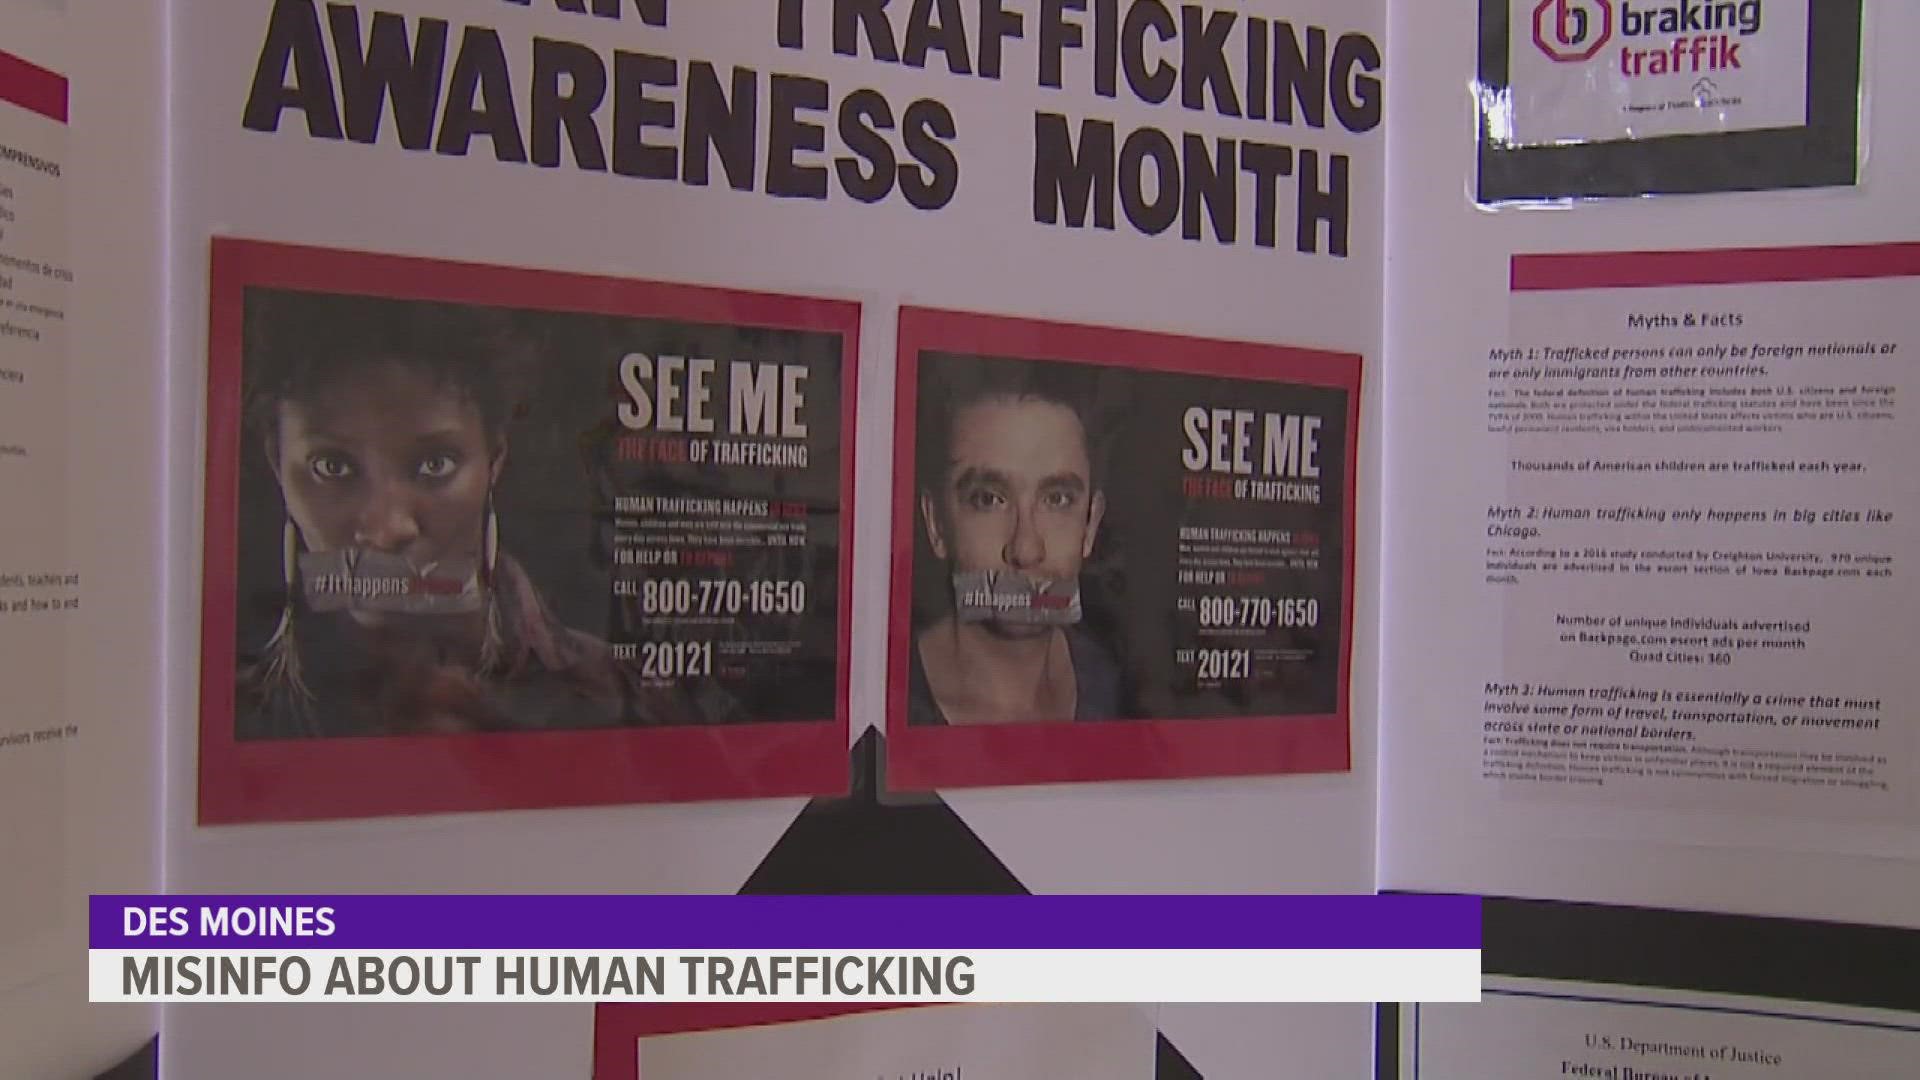 The Iowa Office to Combat Human Trafficking received 43 tips about human trafficking in 2020.